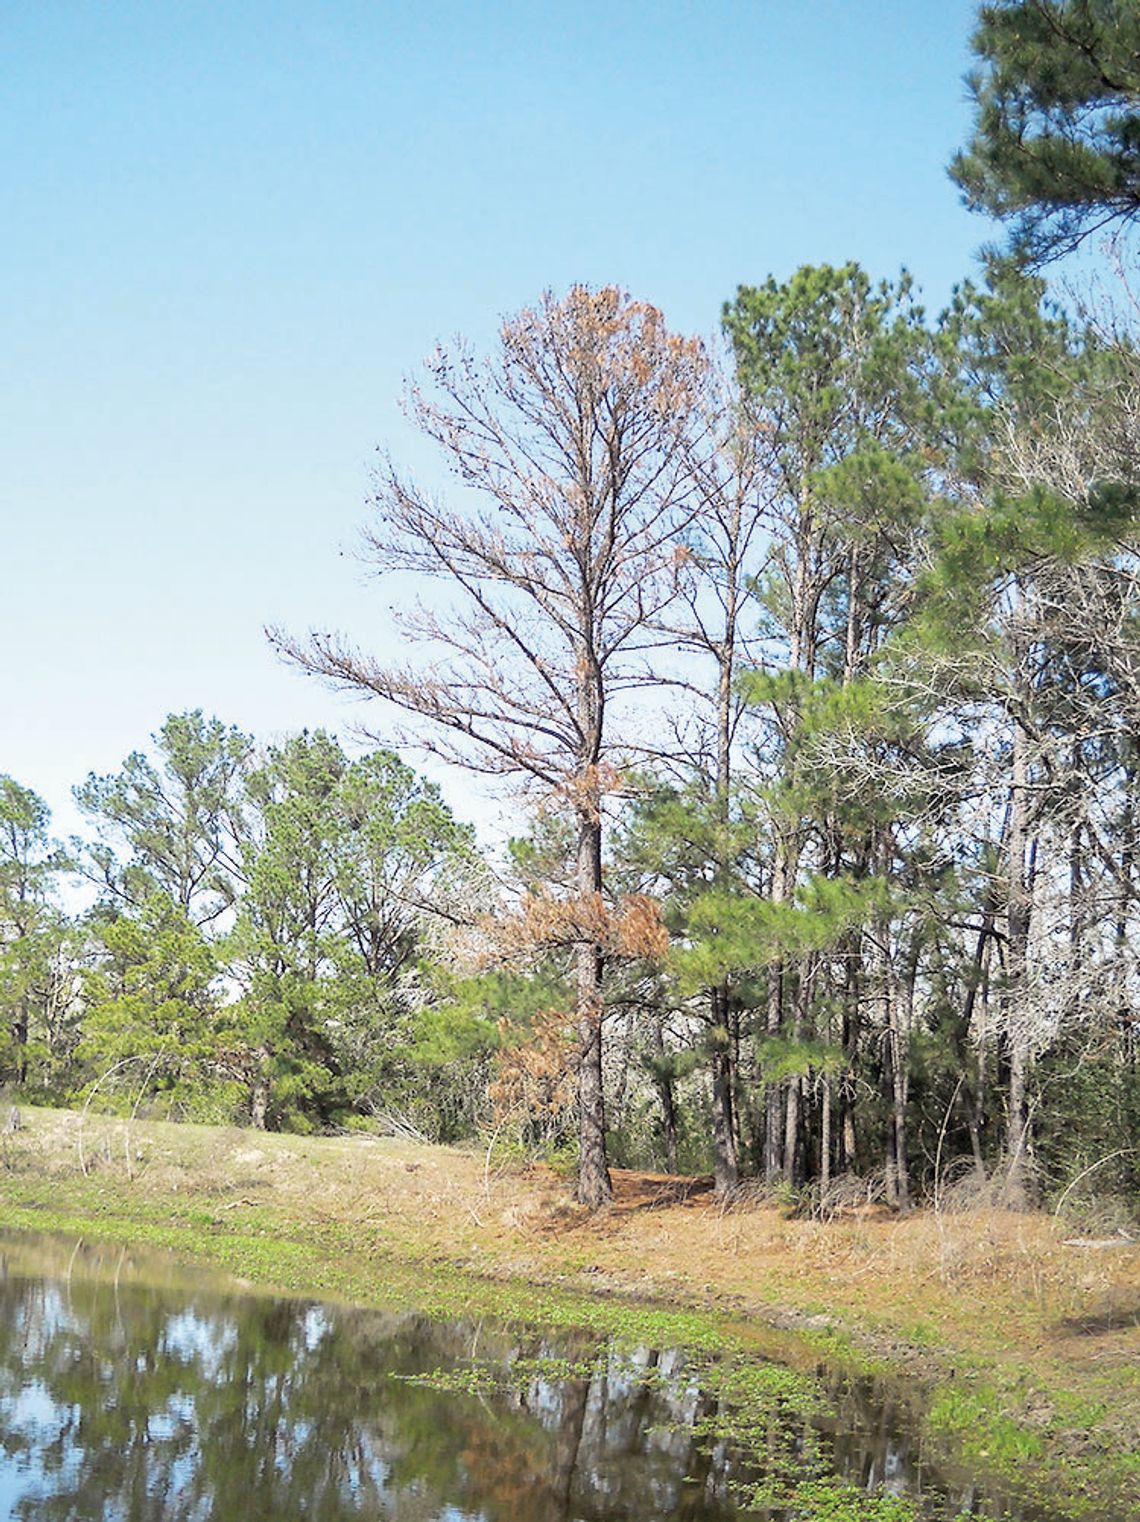 Extreme environmental conditions make Texas trees susceptible to secondary stressors